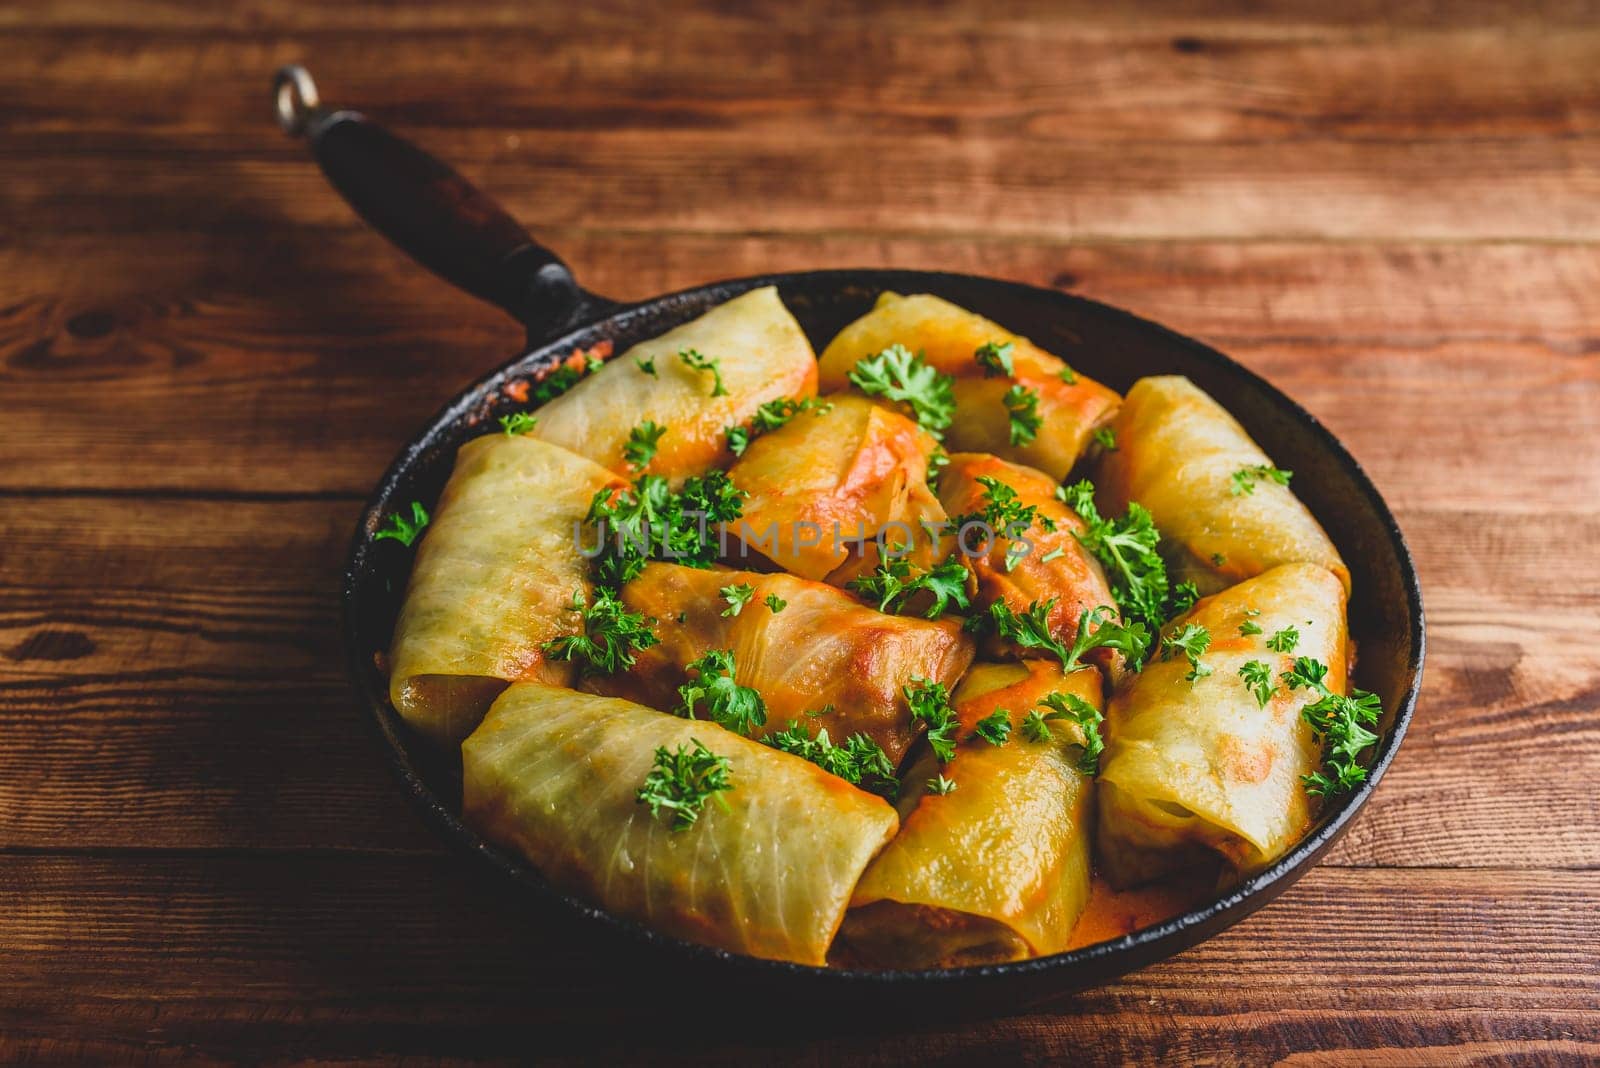 Frying Pan Full of Cabbage Rolls Stuffed with Minced Beef Served with Chopped Parsley by Seva_blsv